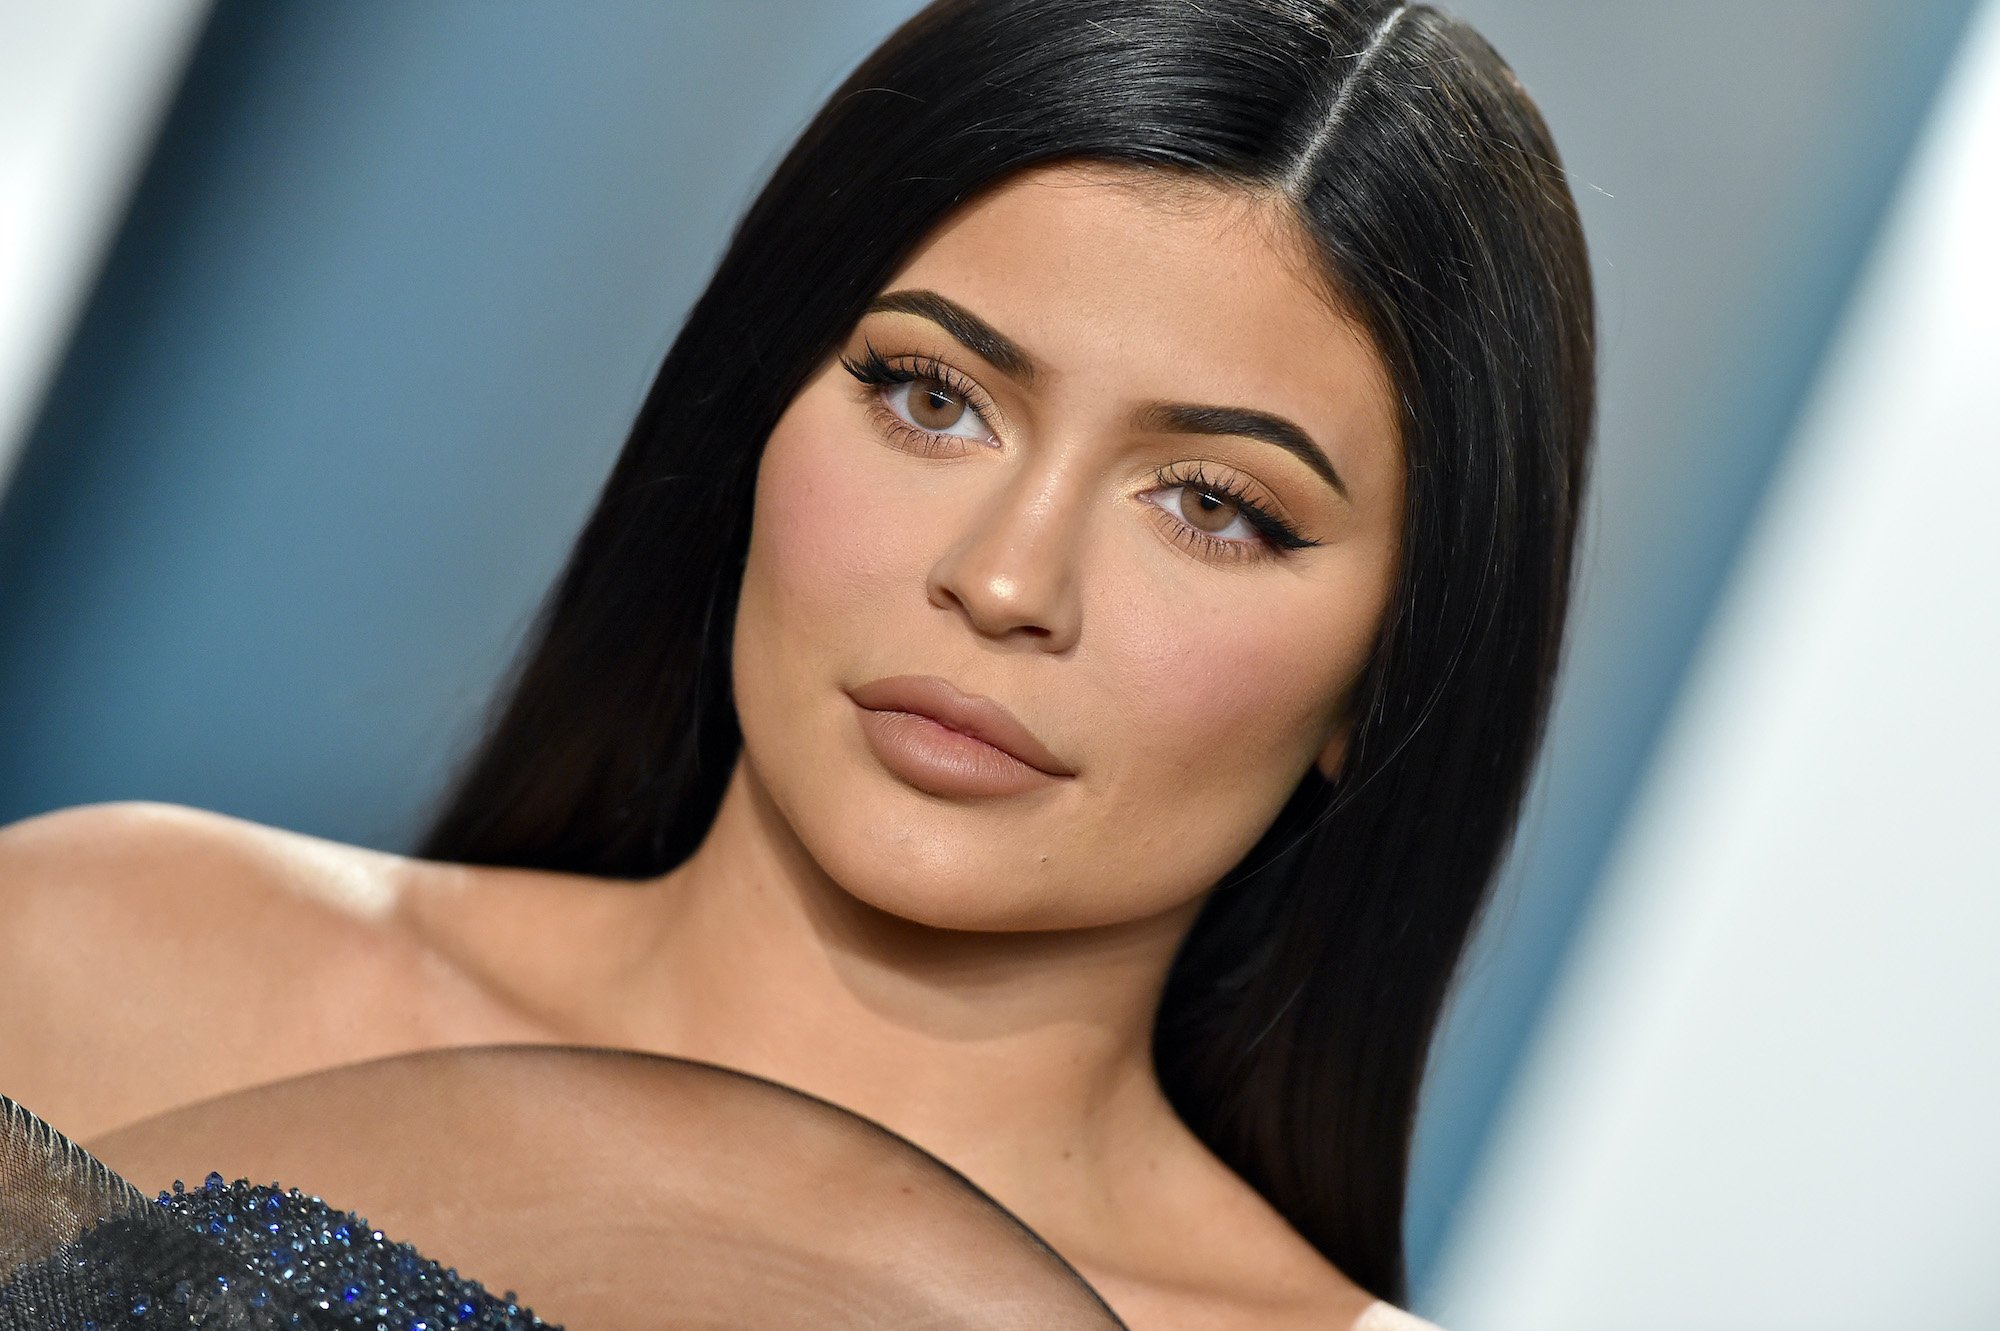 5. Kylie Jenner's Blue Hair: The Products and Techniques She Used - wide 3